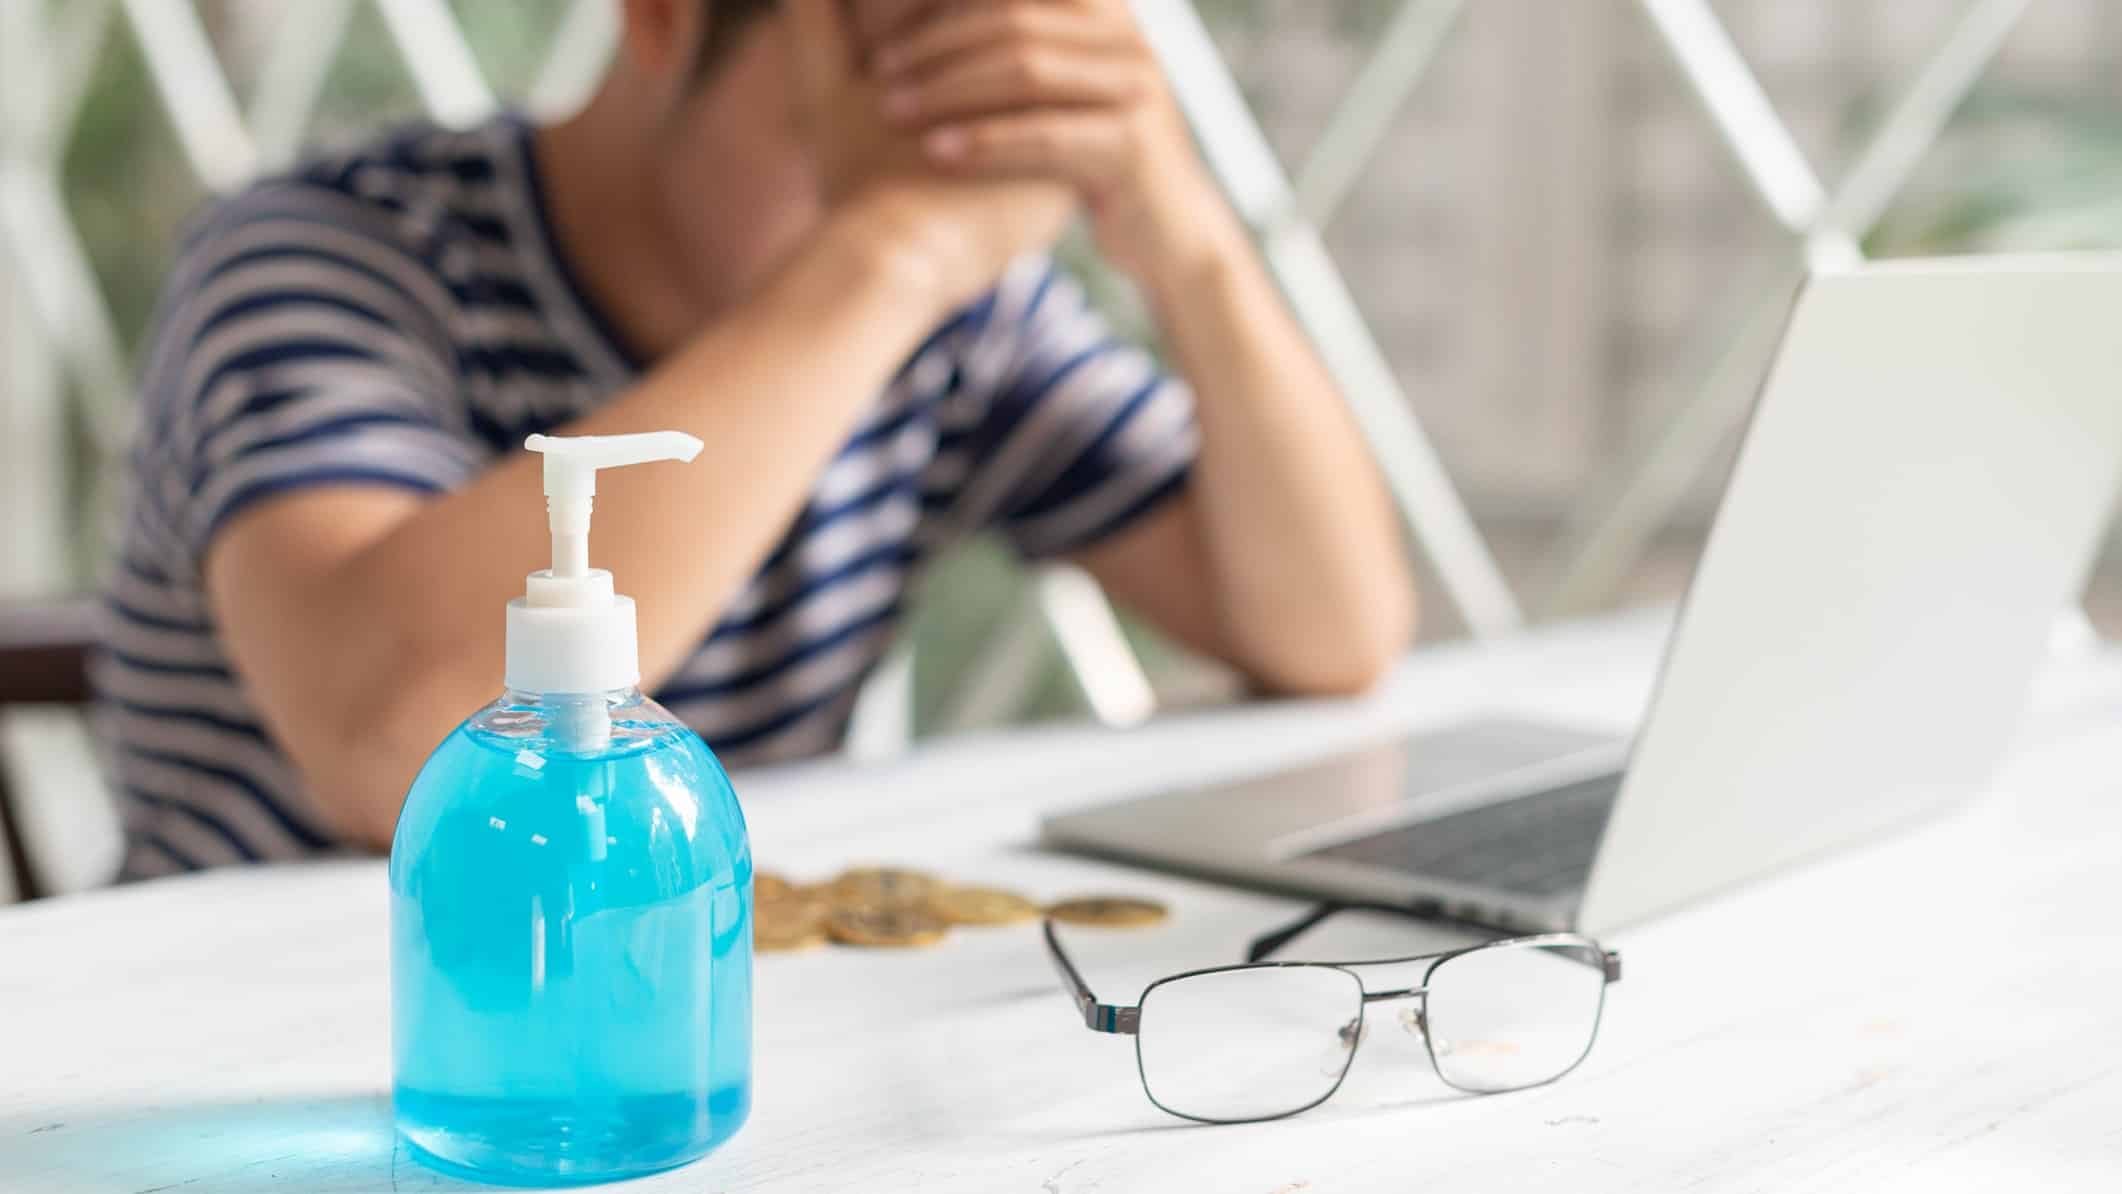 A man at a computers rests his head in his hands with a sanitiser bottle in the foreground